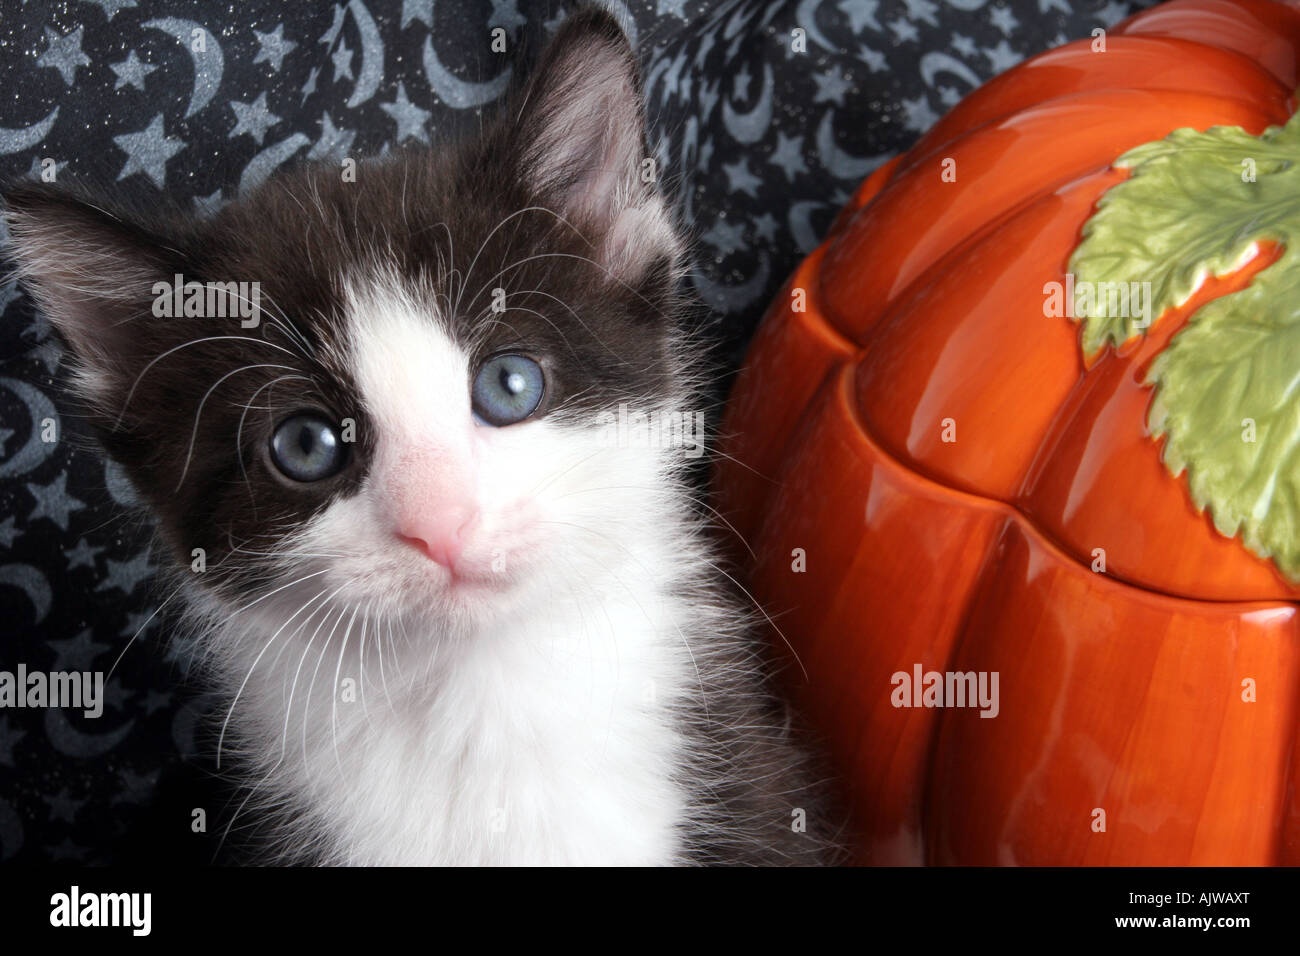 Black and White Kitten at Halloween with a Ceramic Pumpkin Decoration Stock Photo